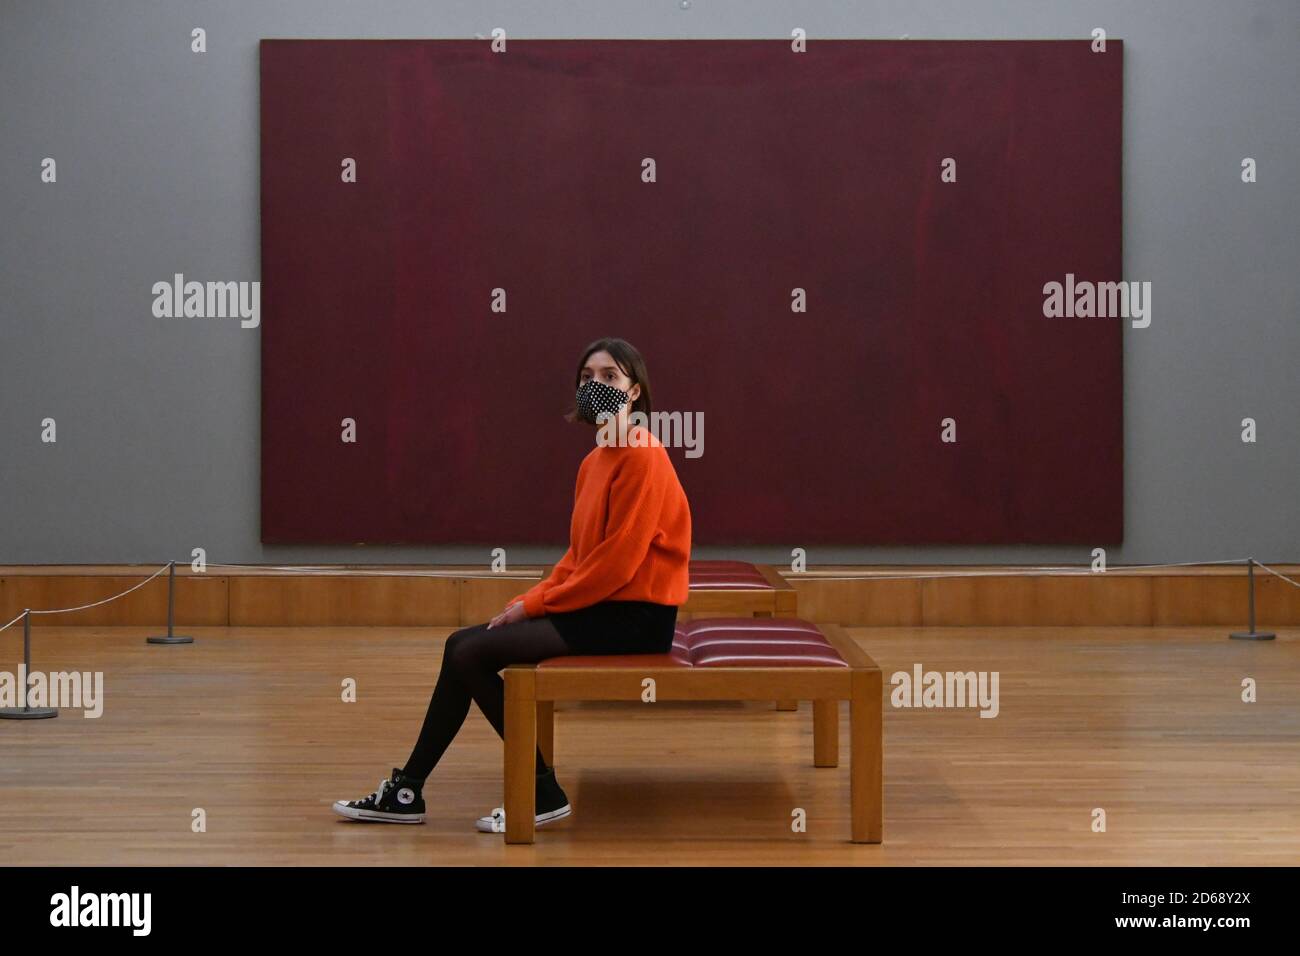 London, UK - 15 October 2020 Mark Rothko, Red on Maroon, 1959, at New displays which open at Tate Britain as part of the museumÕs three collection routes. Rothko and Turner is a new route celebrating 50 years since Mark Rothko first gave Tate his iconic Seagram Murals and joins paintings by JMW Turner. The route through British Art 1540-1920 includes weird and wonderful paintings of fairies from the past 200 years, as well as Gwen John, Stanley Spencer and the Vorticists. British Art 1930-Now has also been expanded with a new display about Kim Lim, and ground-breaking sculptures from the 1980s Stock Photo